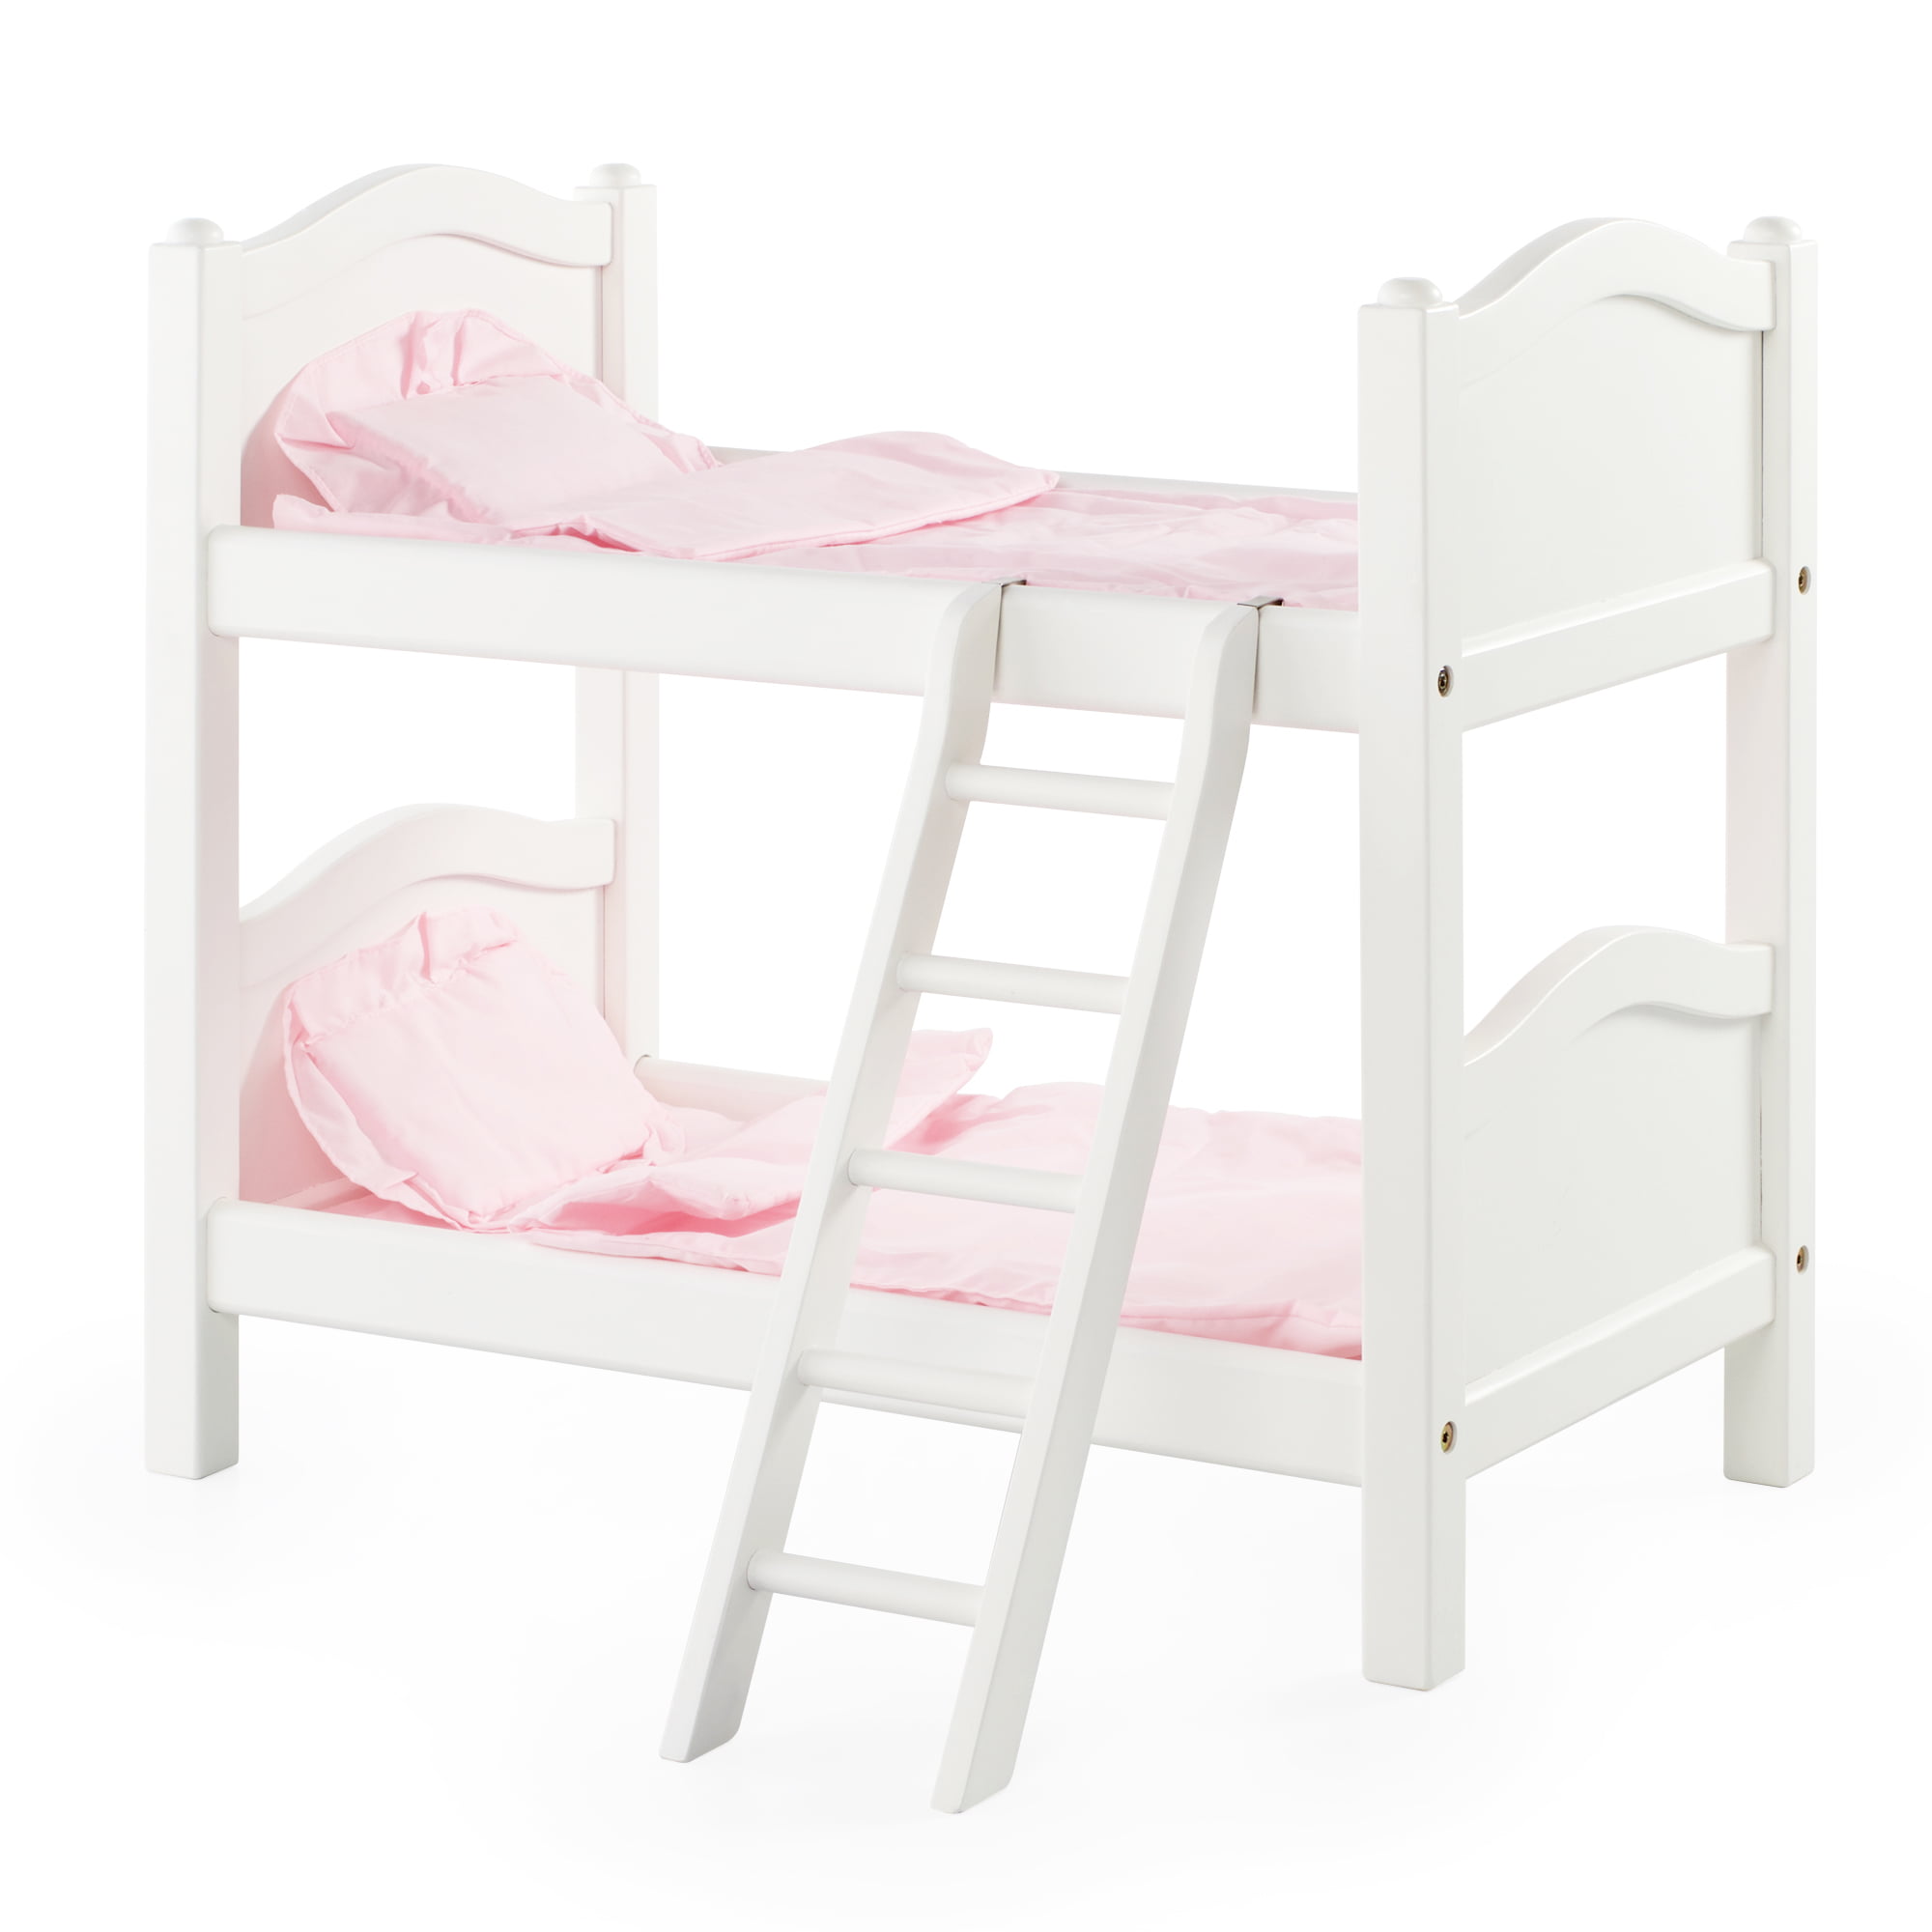 Doll Bunk Bed White Com, Wooden Doll Bunk Beds With Ladder